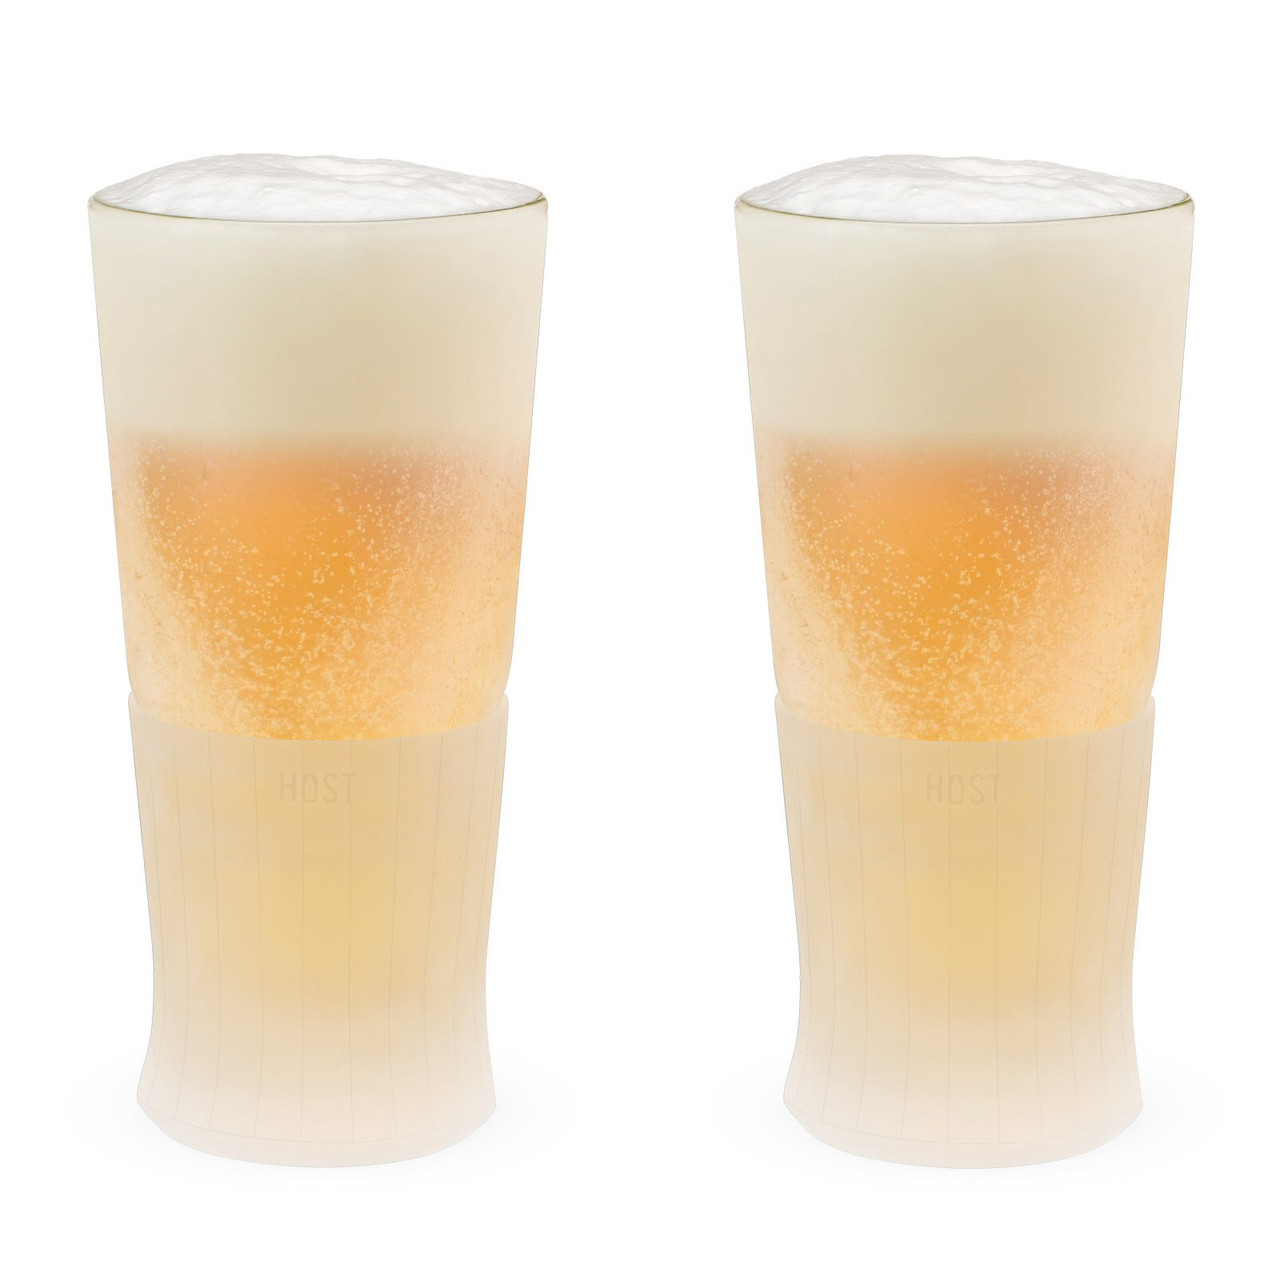 https://cdn11.bigcommerce.com/s-oo0gdojvjo/images/stencil/1280x1280/products/68510/100653/glass-freeze-beer-glasses-by-host-set-of-2__84496.1683777497.jpg?c=2